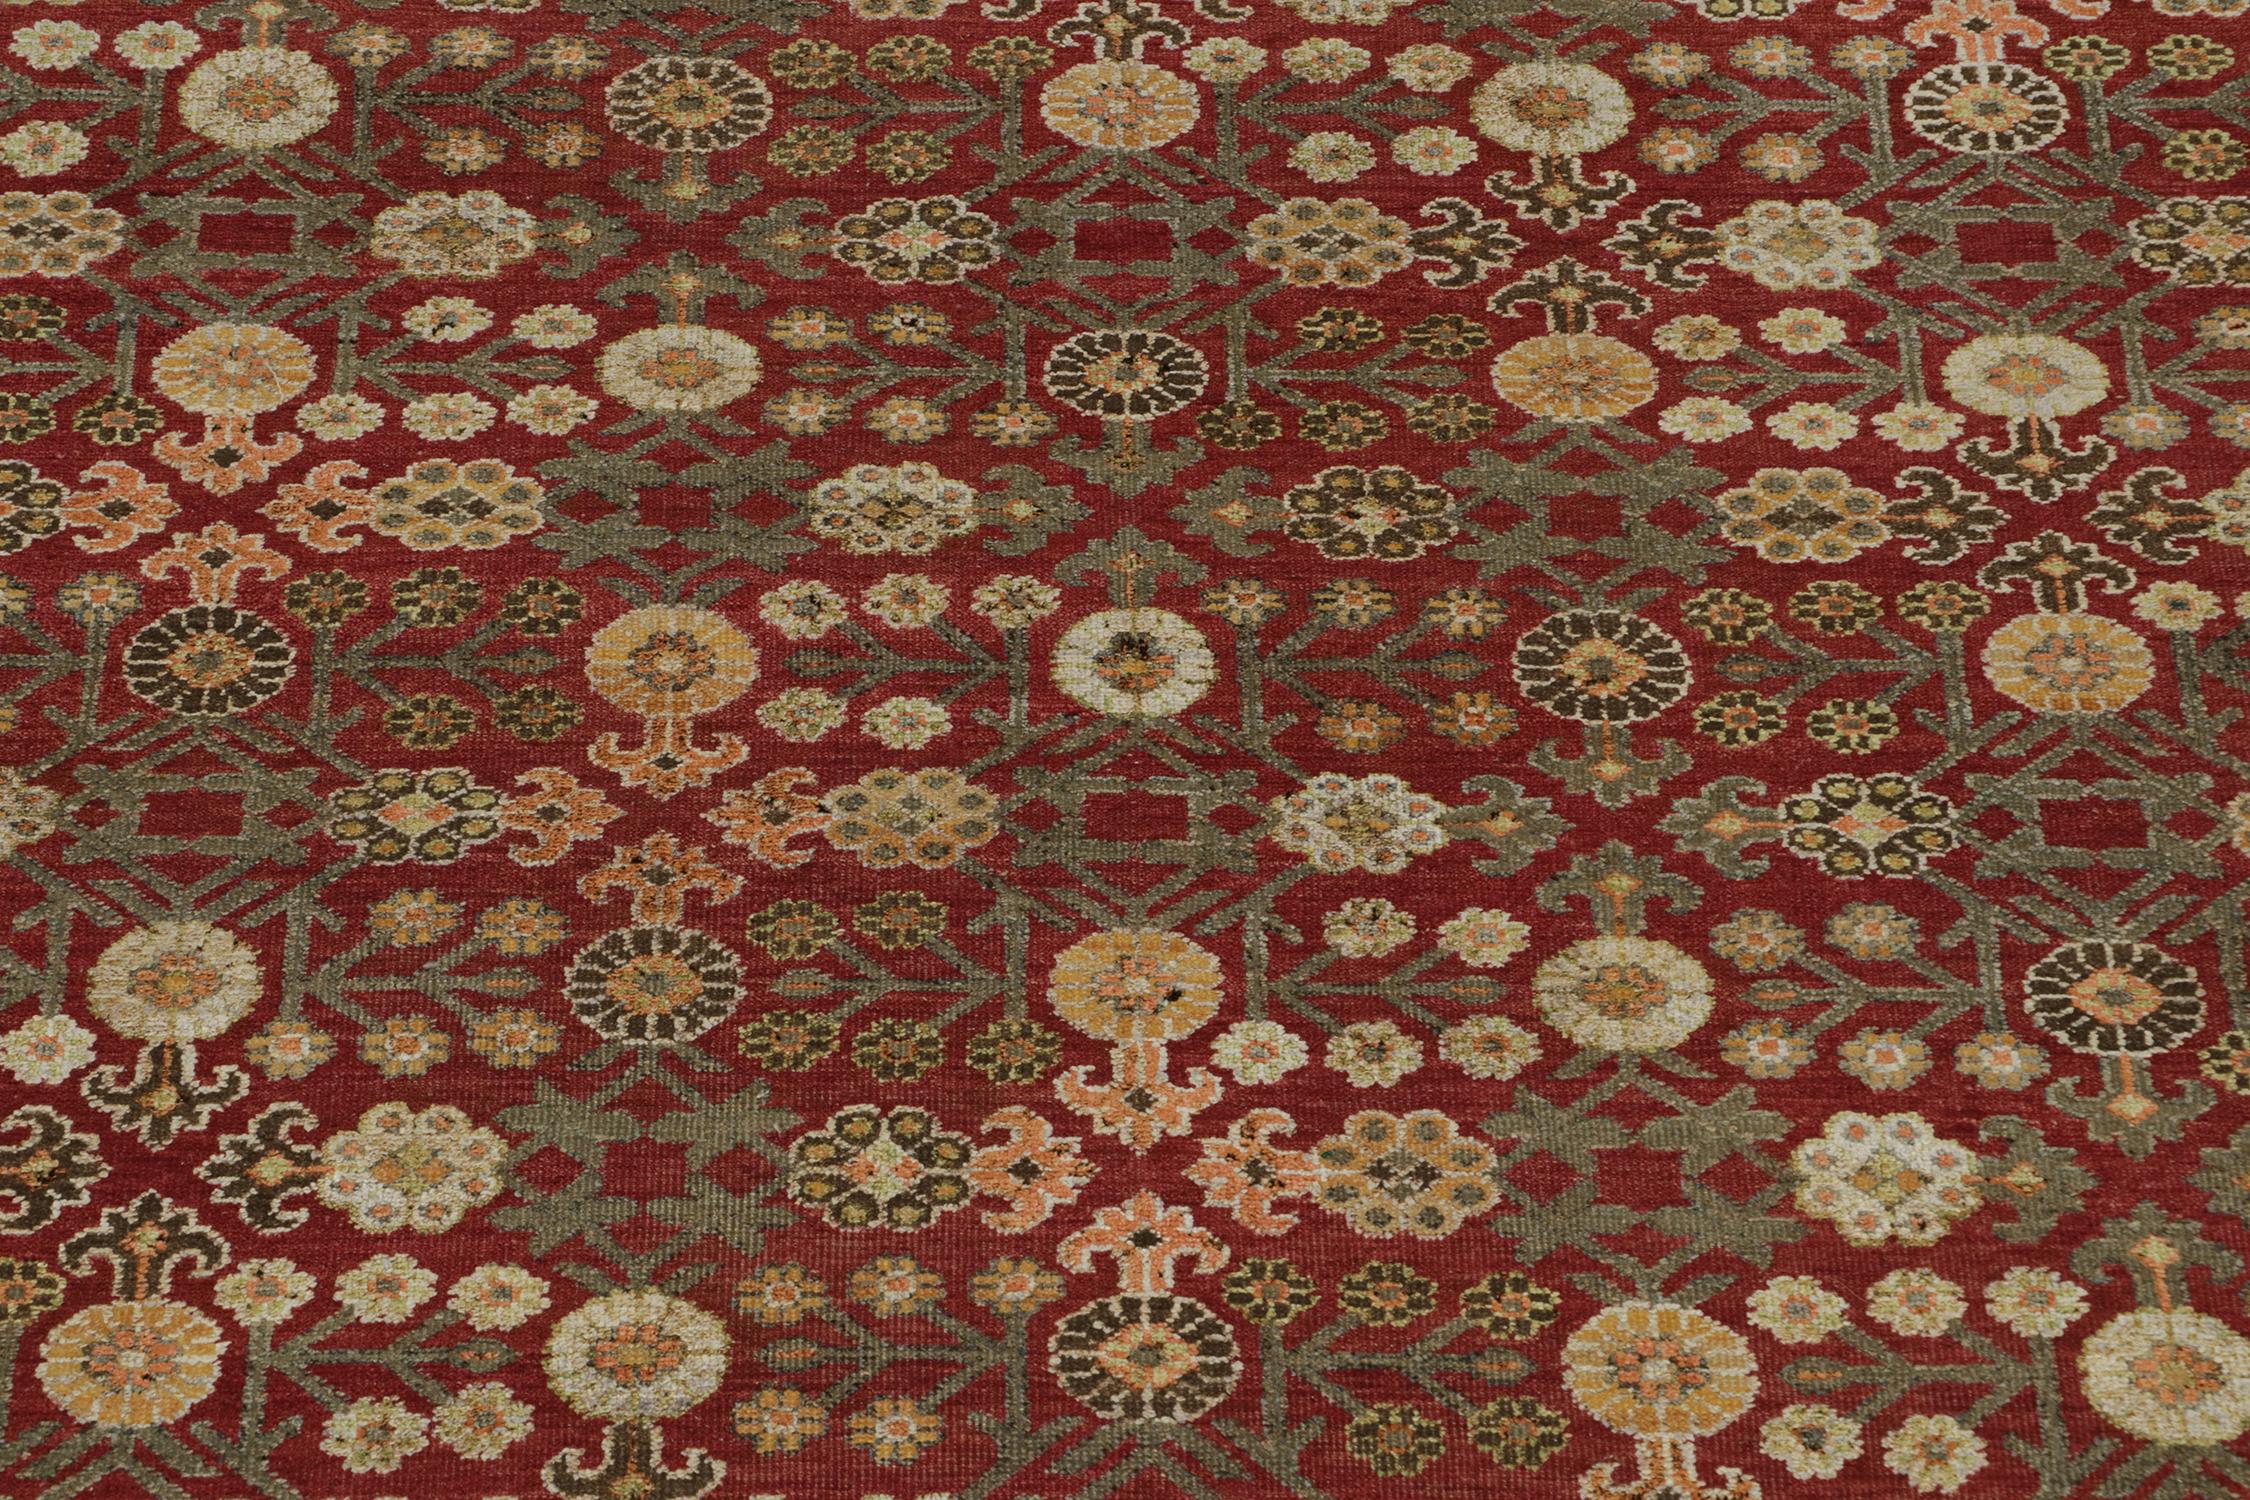 Contemporary Rug & Kilim’s Khotan Style Rug with Maroon and Gold with Floral Patterns For Sale